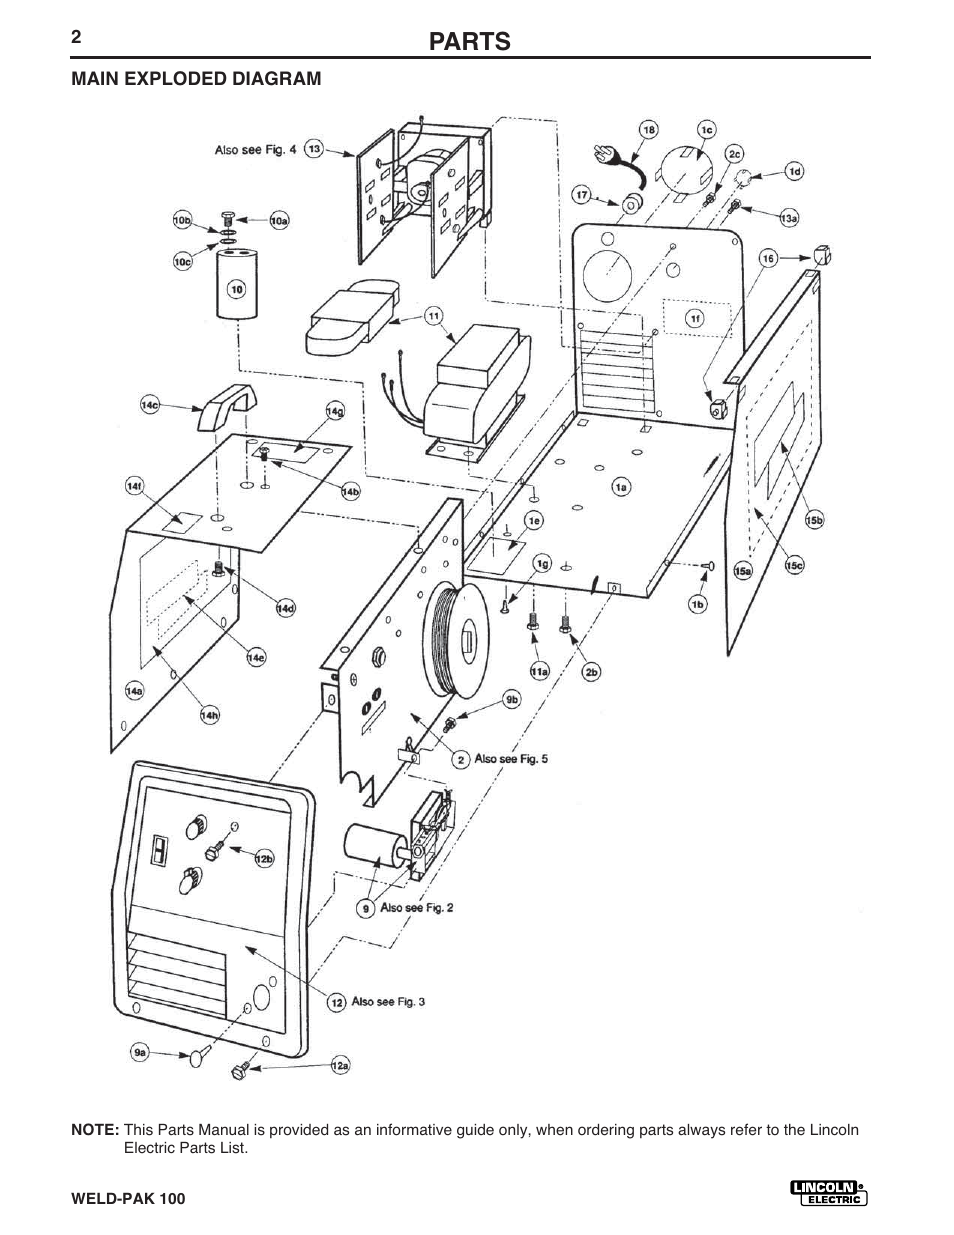 Parts | Lincoln Electric IM546 WELD-PAK 100 PLUS User Manual | Page 48 / 60